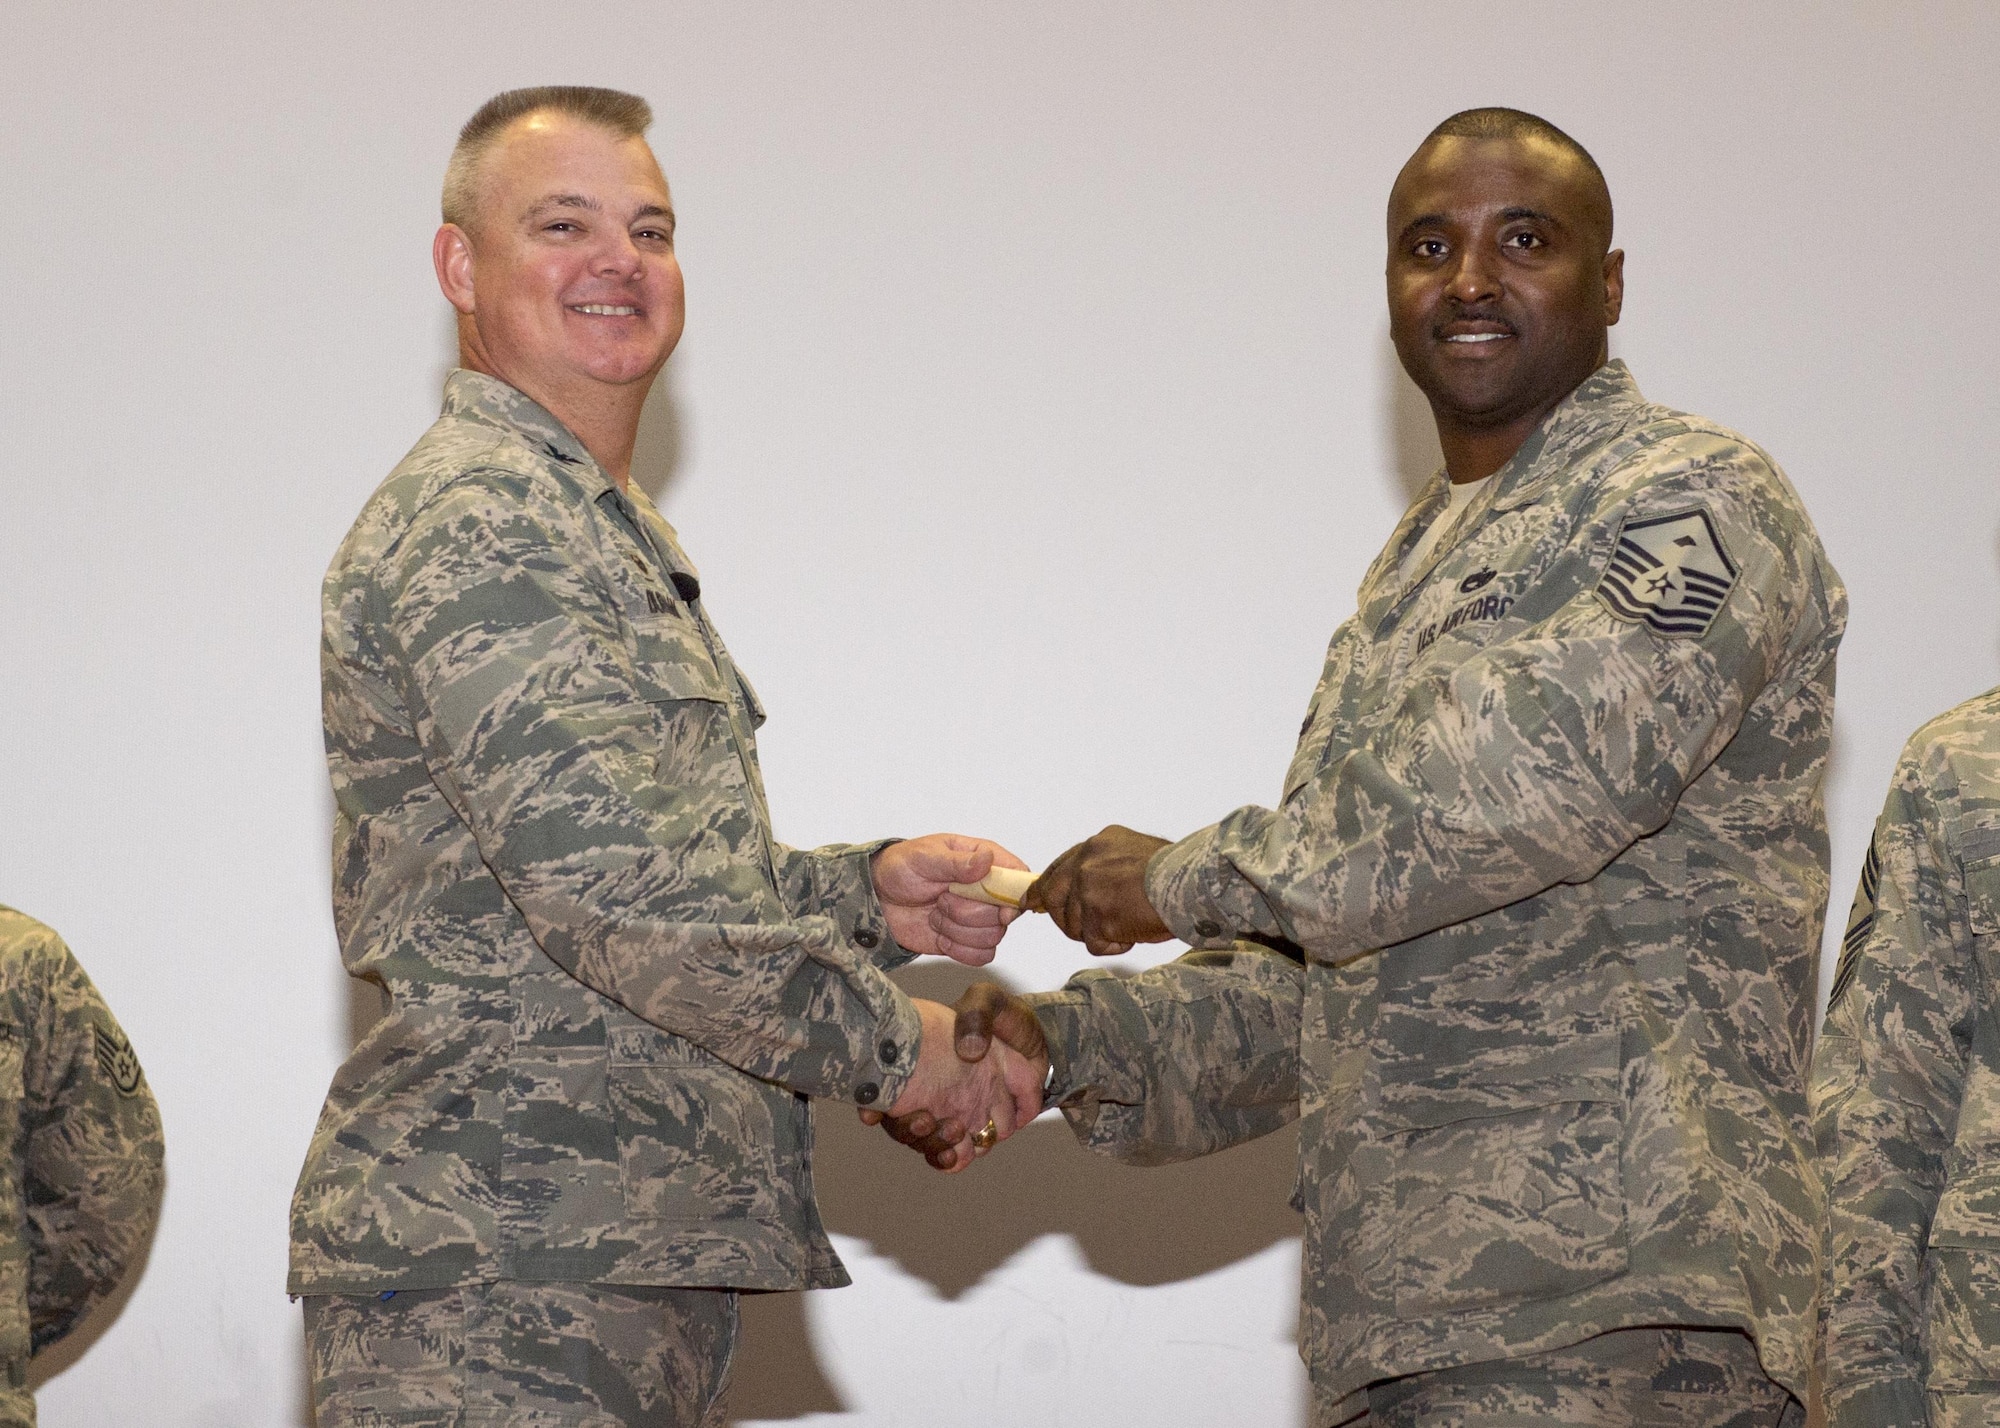 Master Sgt. Kuentin Smart, 46th Aerial Port Squadron, shakes hands with Col. Scott D. Durham, 512th AW commander, during the wing's Community College of the Air Force graduation ceremony, Dec. 3, 2016, Dover Air Force Base, Del. The wing surpassed their goal of awarding 100 CCAF degrees during the year and awarded 109 degrees. (U.S. Air Force Photo/Staff Sgt. Renee Jackson)